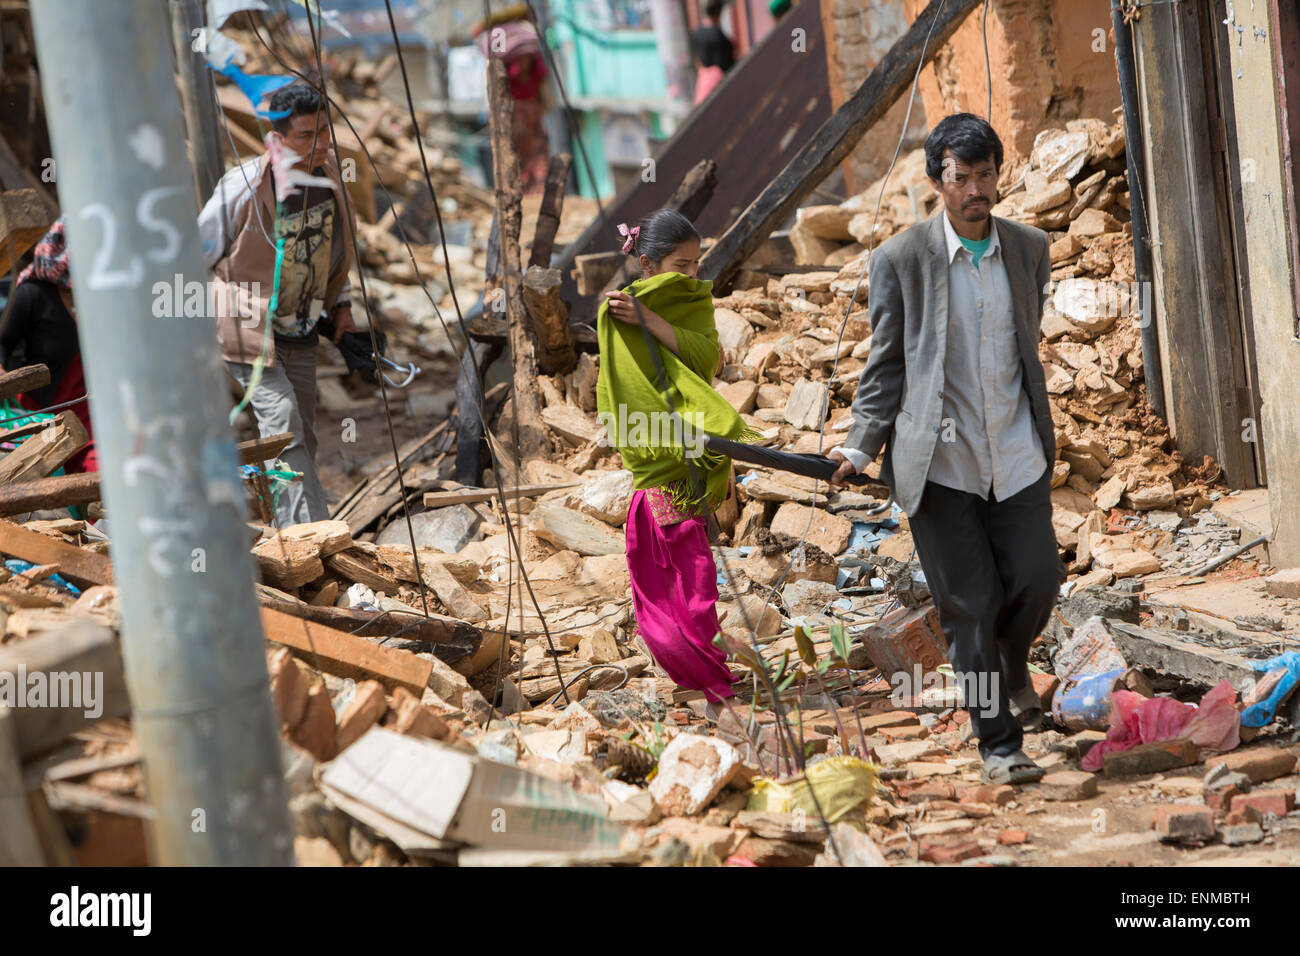 Residents walk through the streets of Chautara town in Sindhulpalchowk District, Nepal following the 2015 earthquake. Stock Photo